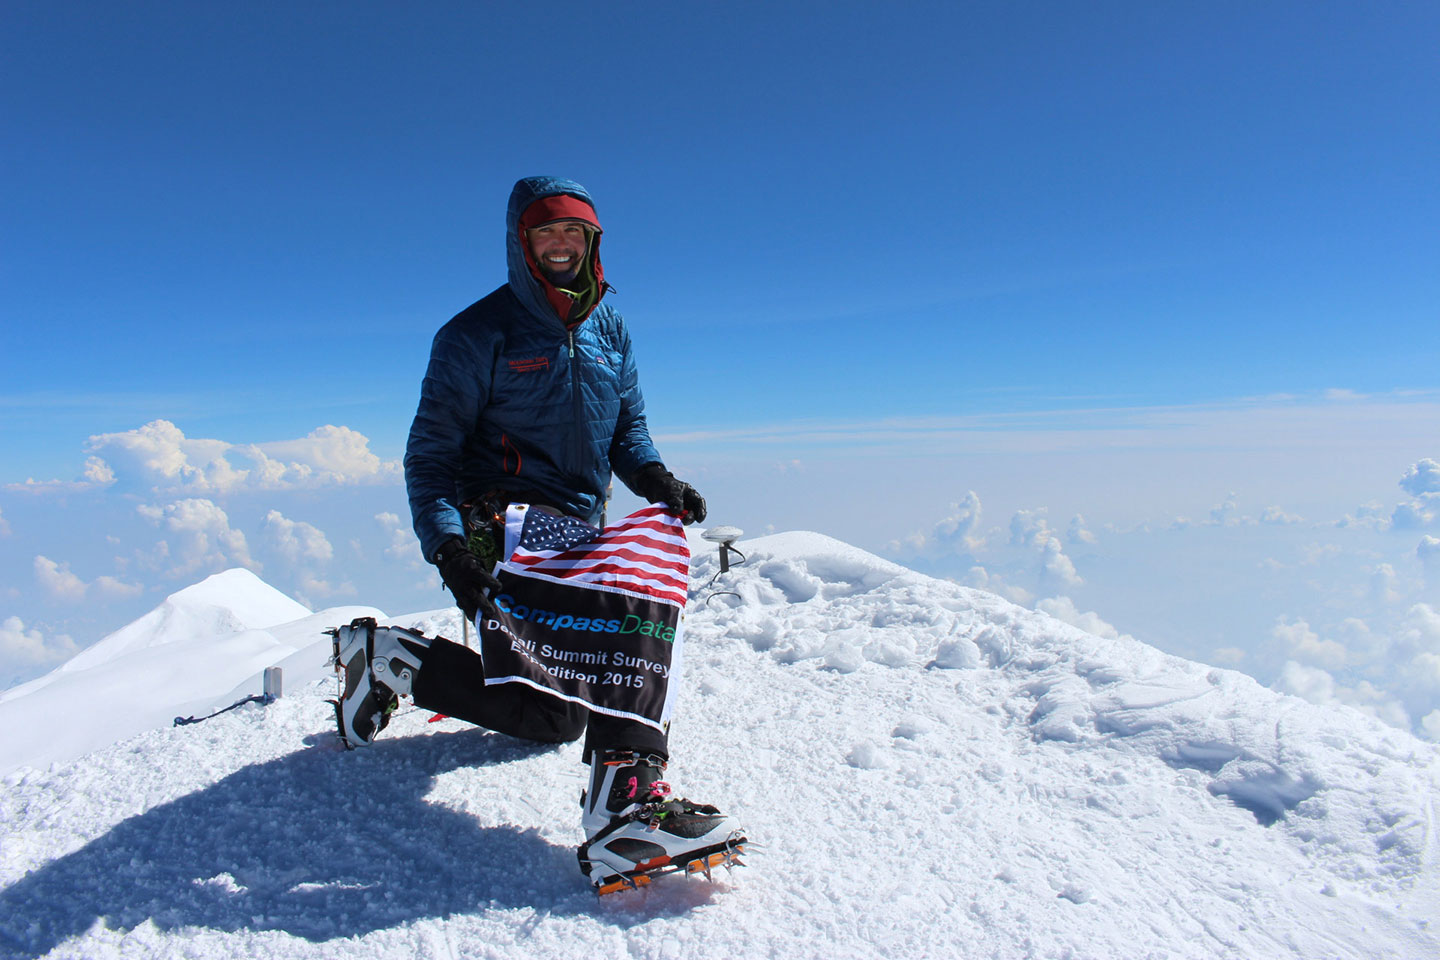 GPS survey party chief Blaine Horner reaches the summit of Denali, establishing its official elevation of 20,310 feet.